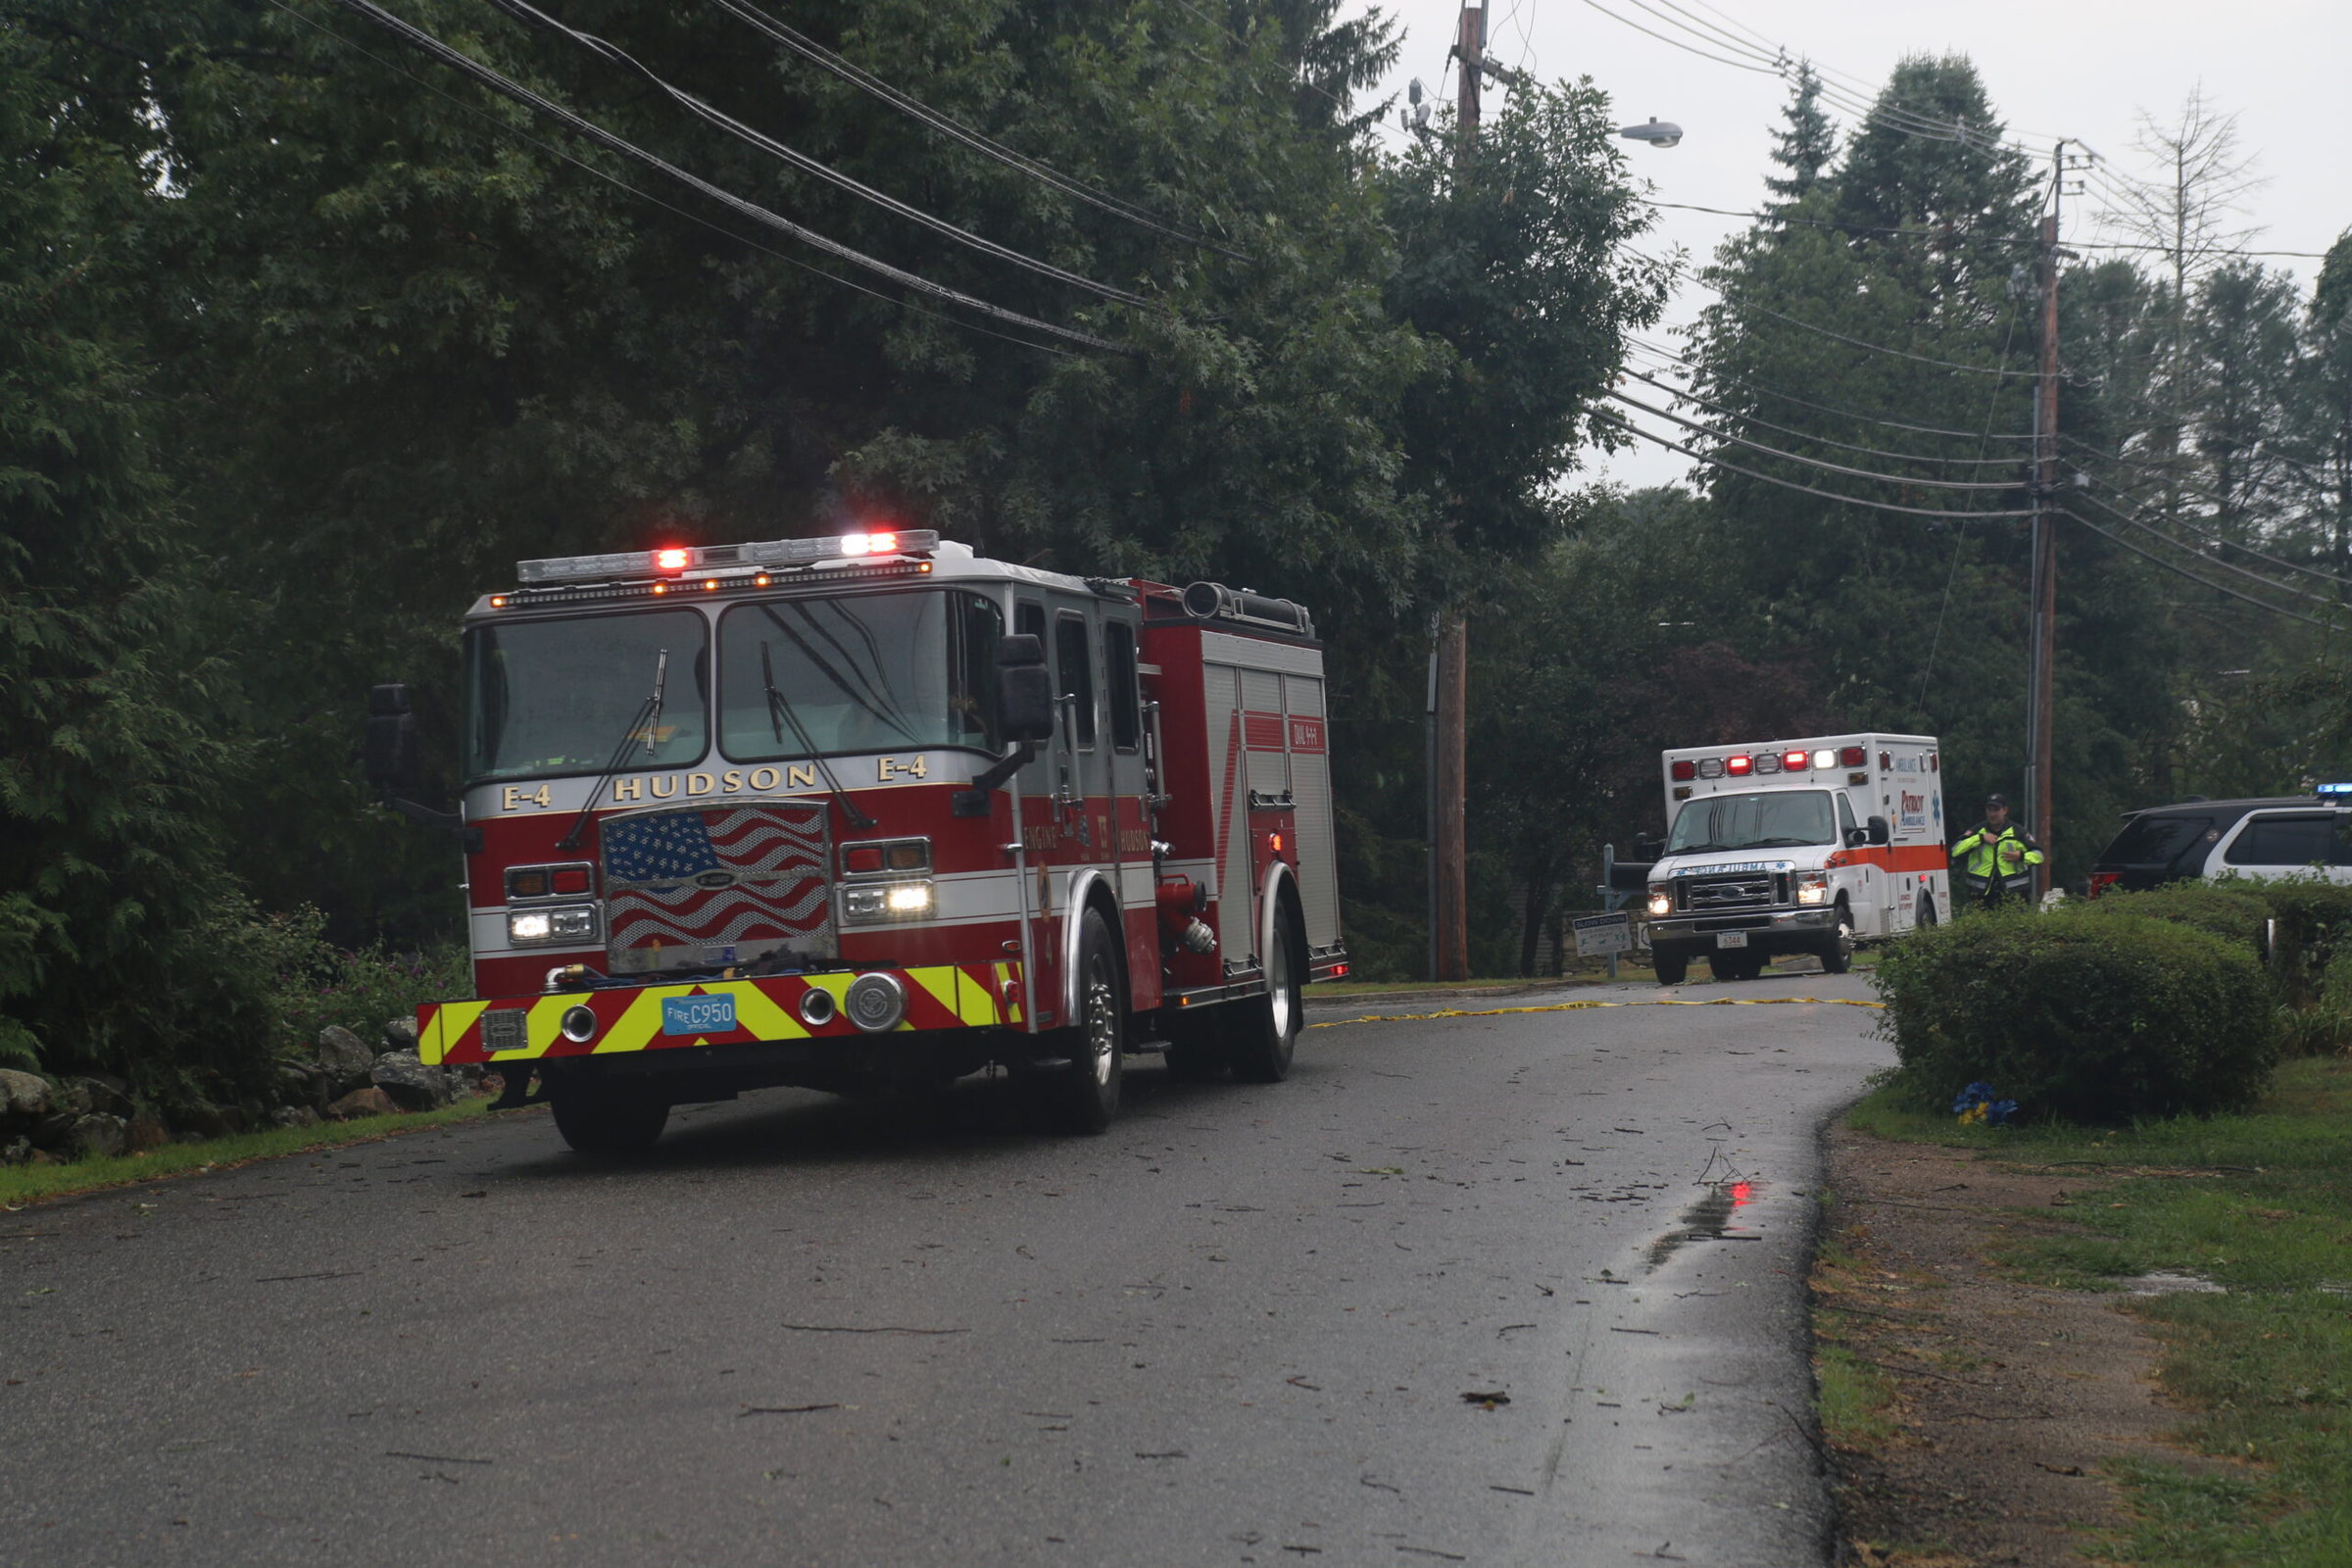 Storm leads to downed wires, fire in Southborough